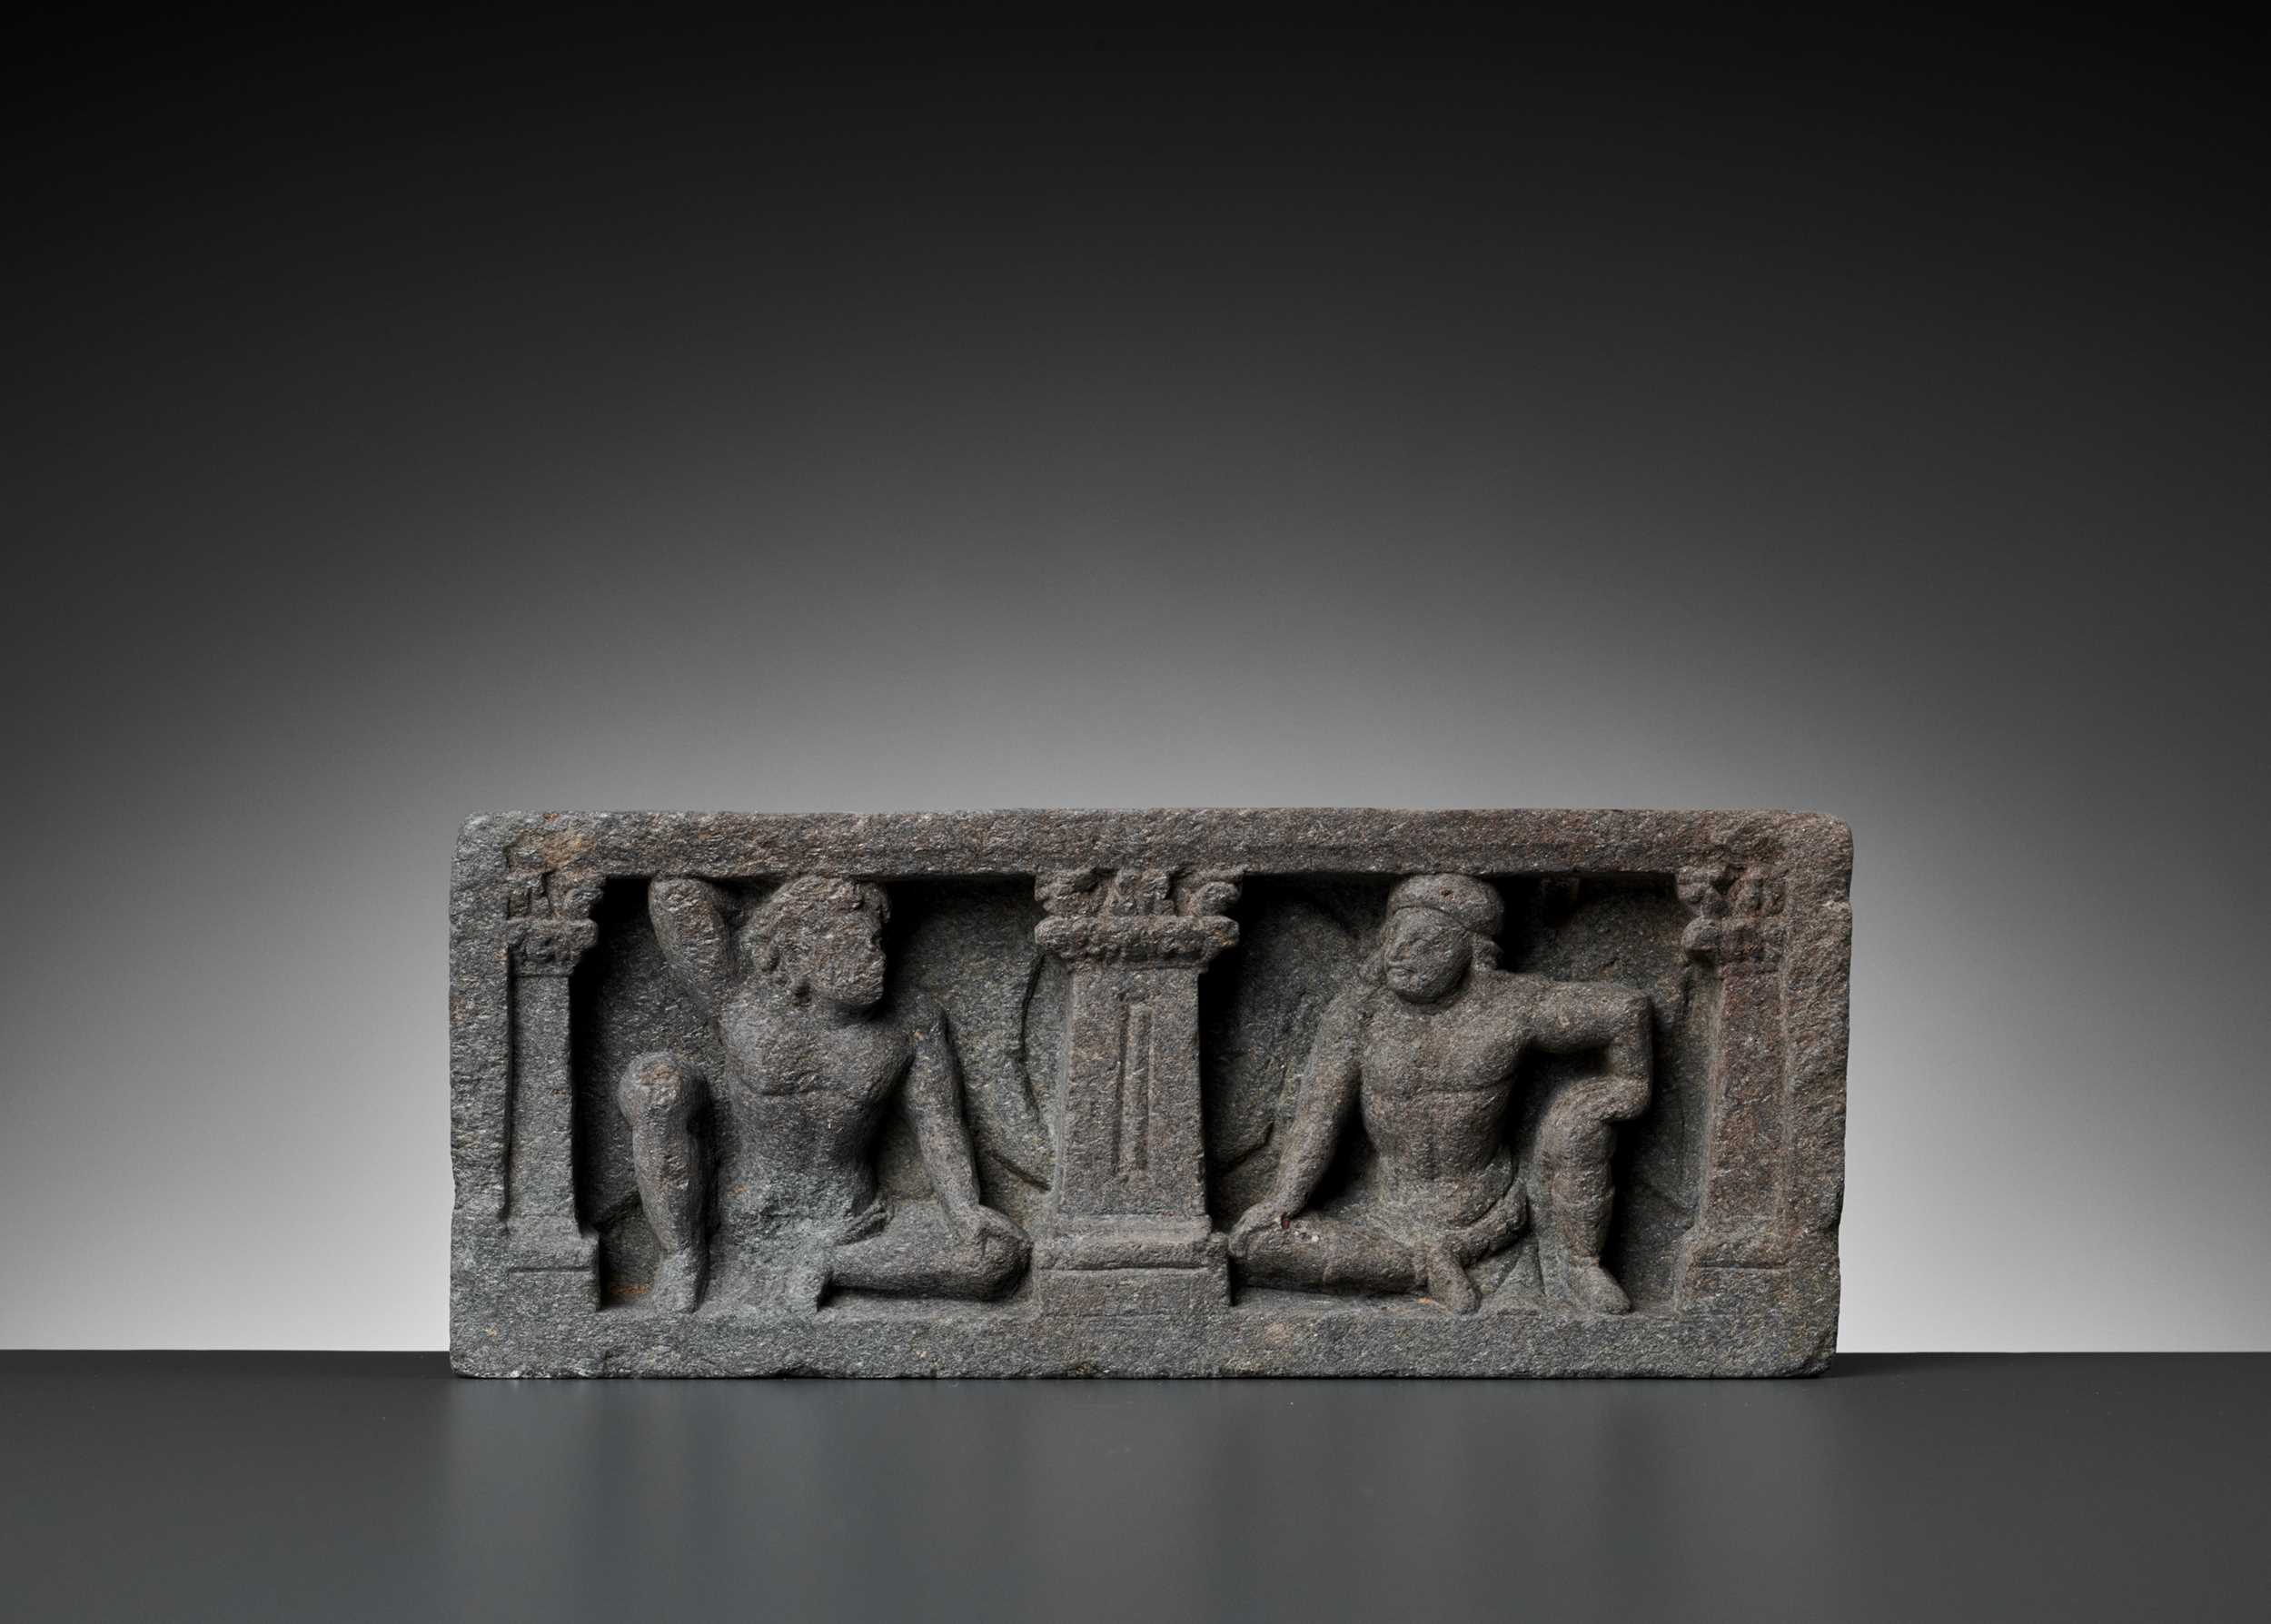 Lot 547 - A GRAY SCHIST RELIEF WITH TWO ATLAS FIGURES, GANDHARA